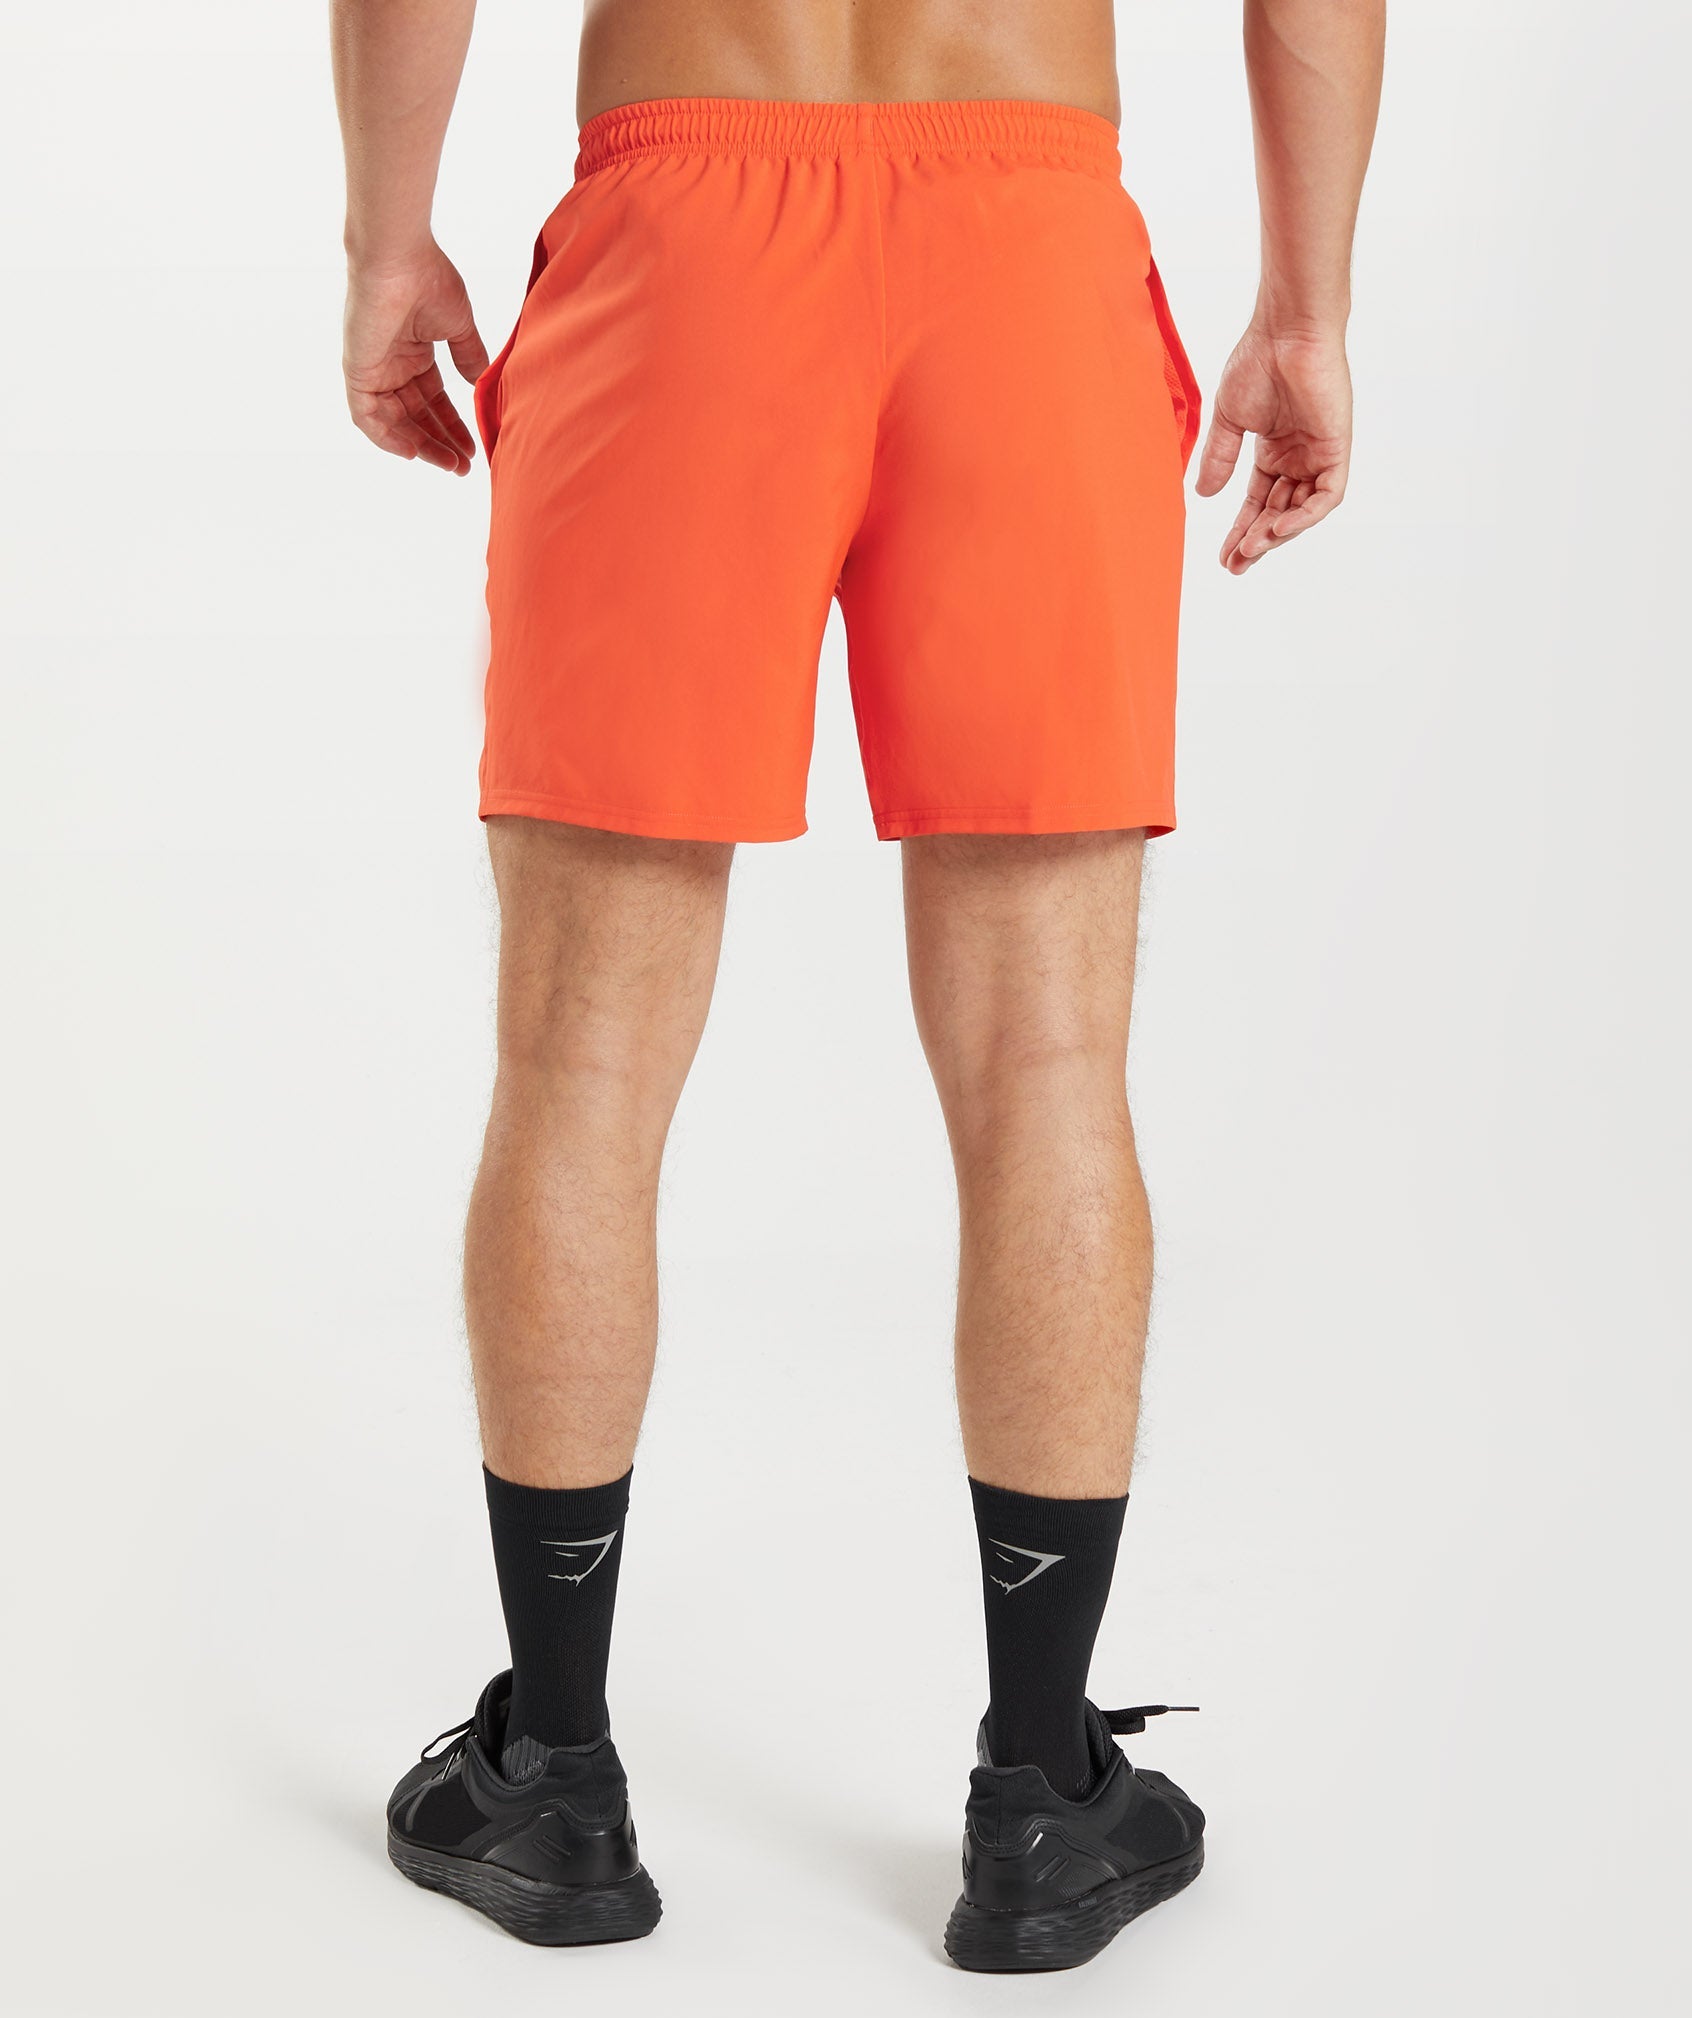 Arrival 7" Shorts in Pepper Red - view 2